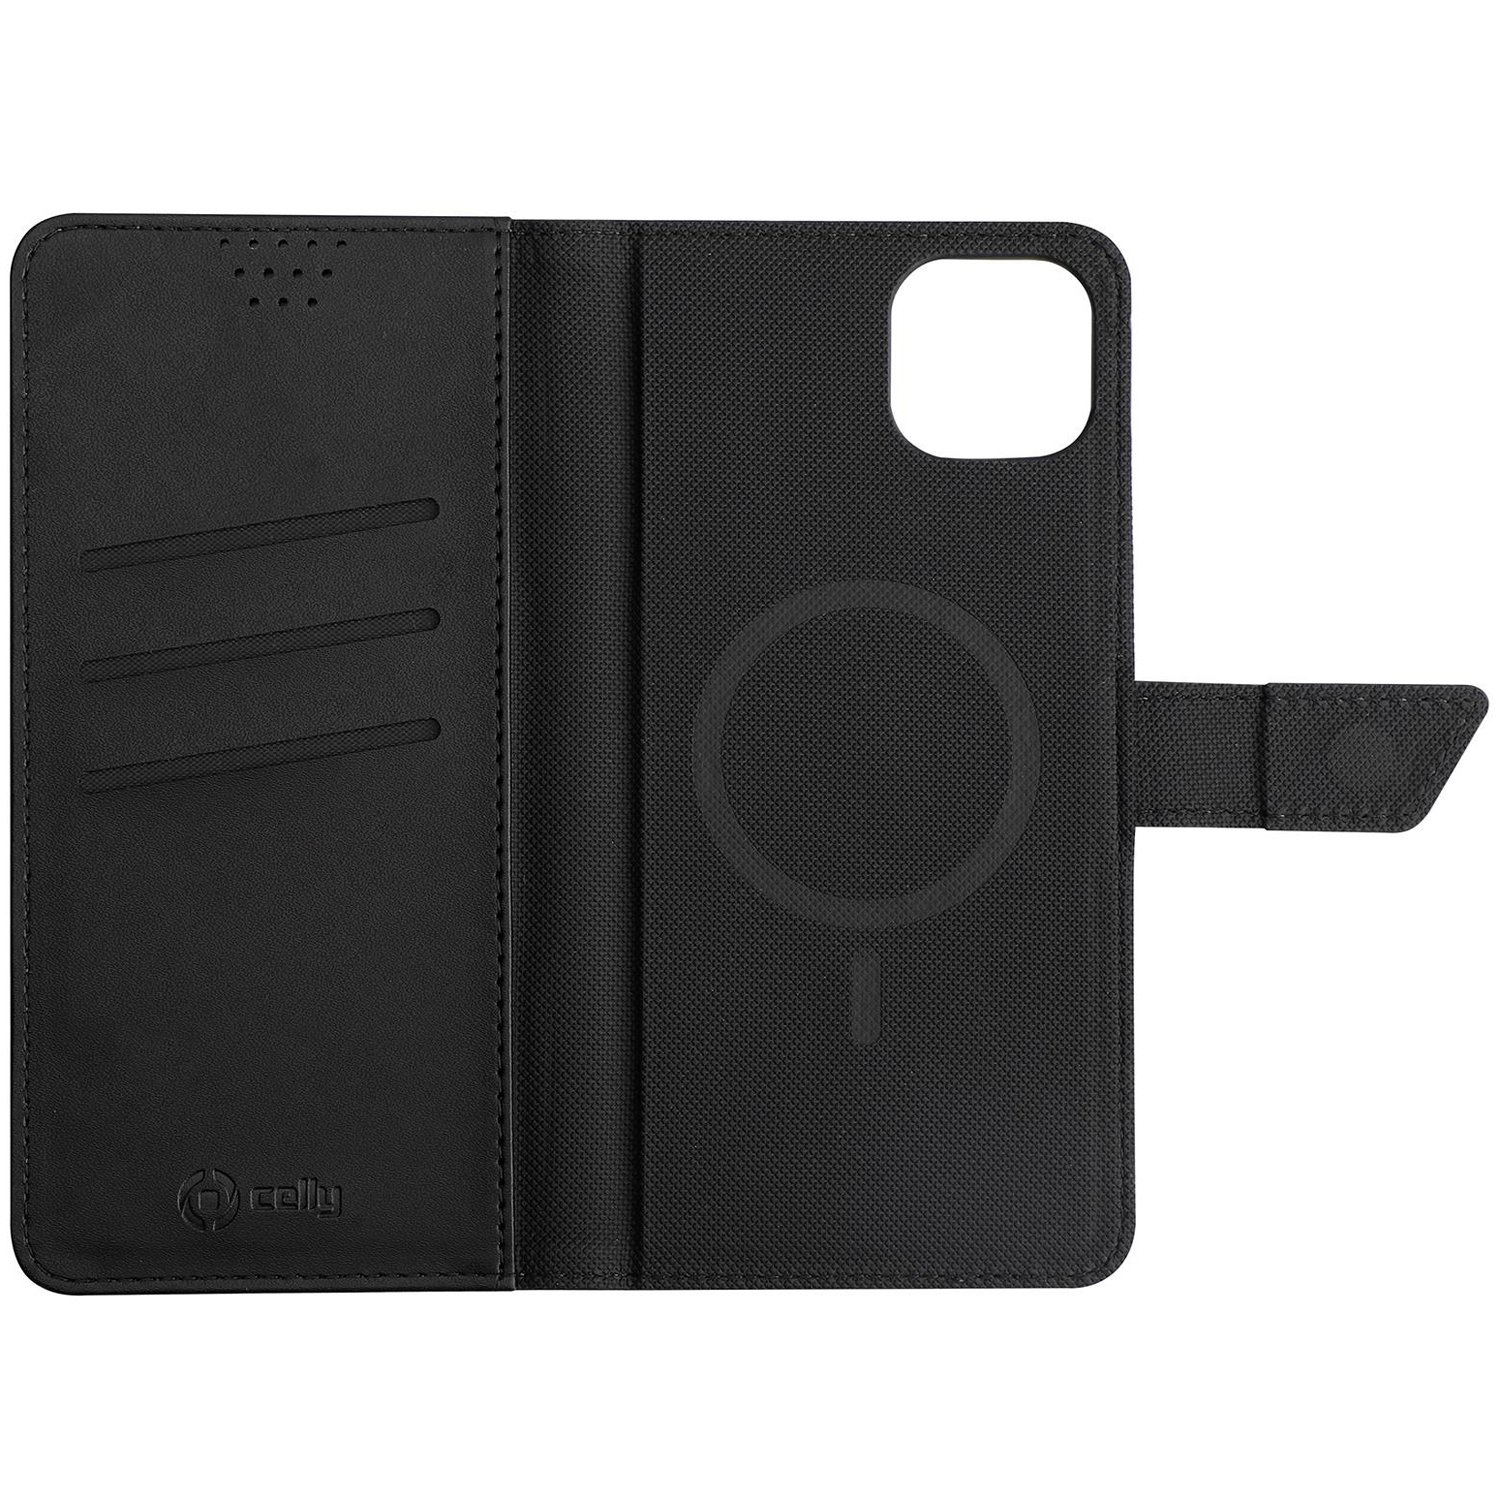 Max, MagSafe Cover, Max Schwarz 14 CELLY Case iPhone Apple, 14 Schwarz, iPhone Wallet Flip